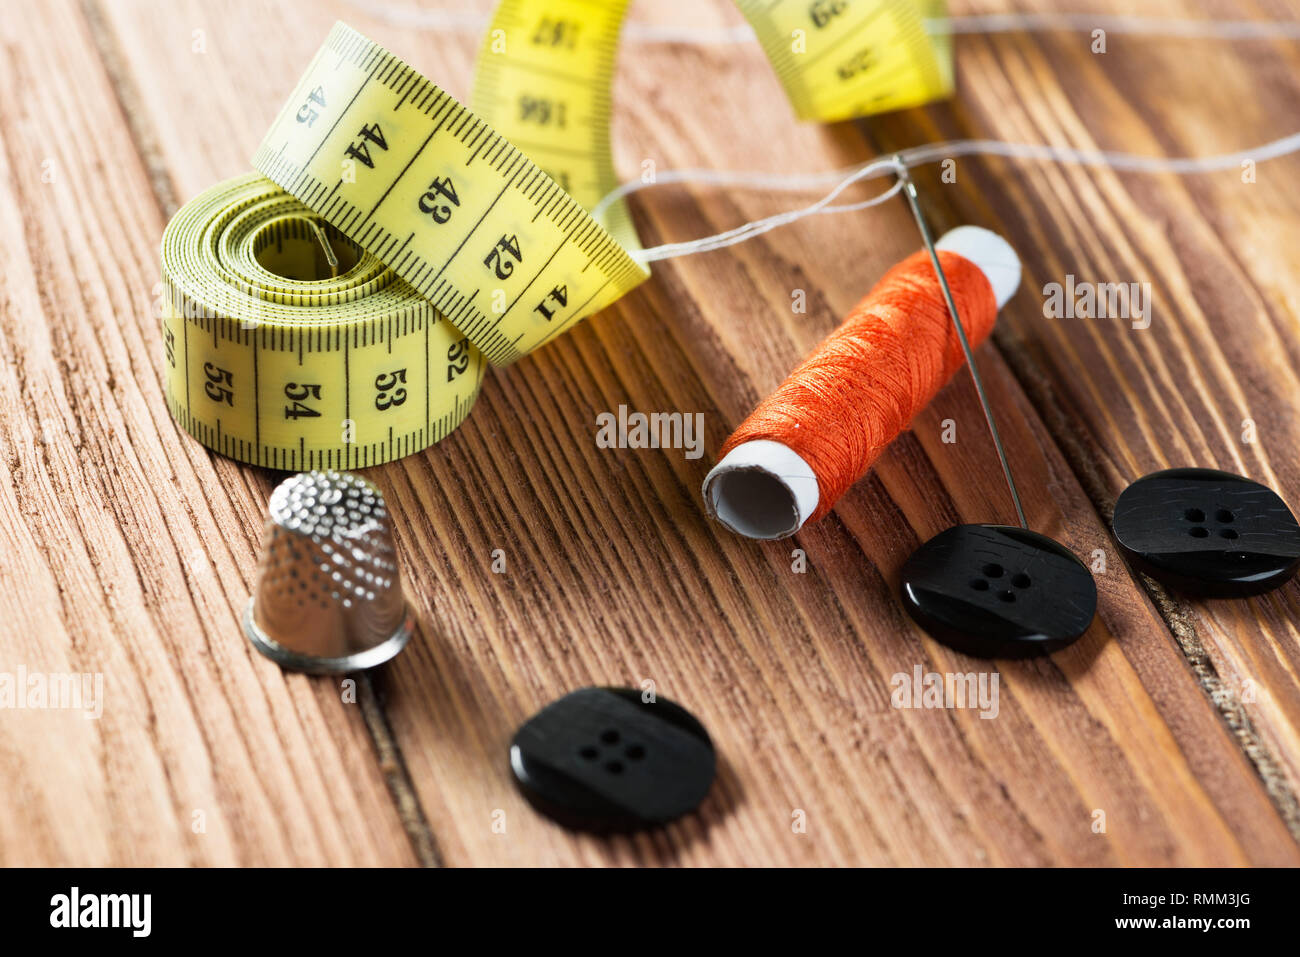 Items for sewing or DIY Stock Photo